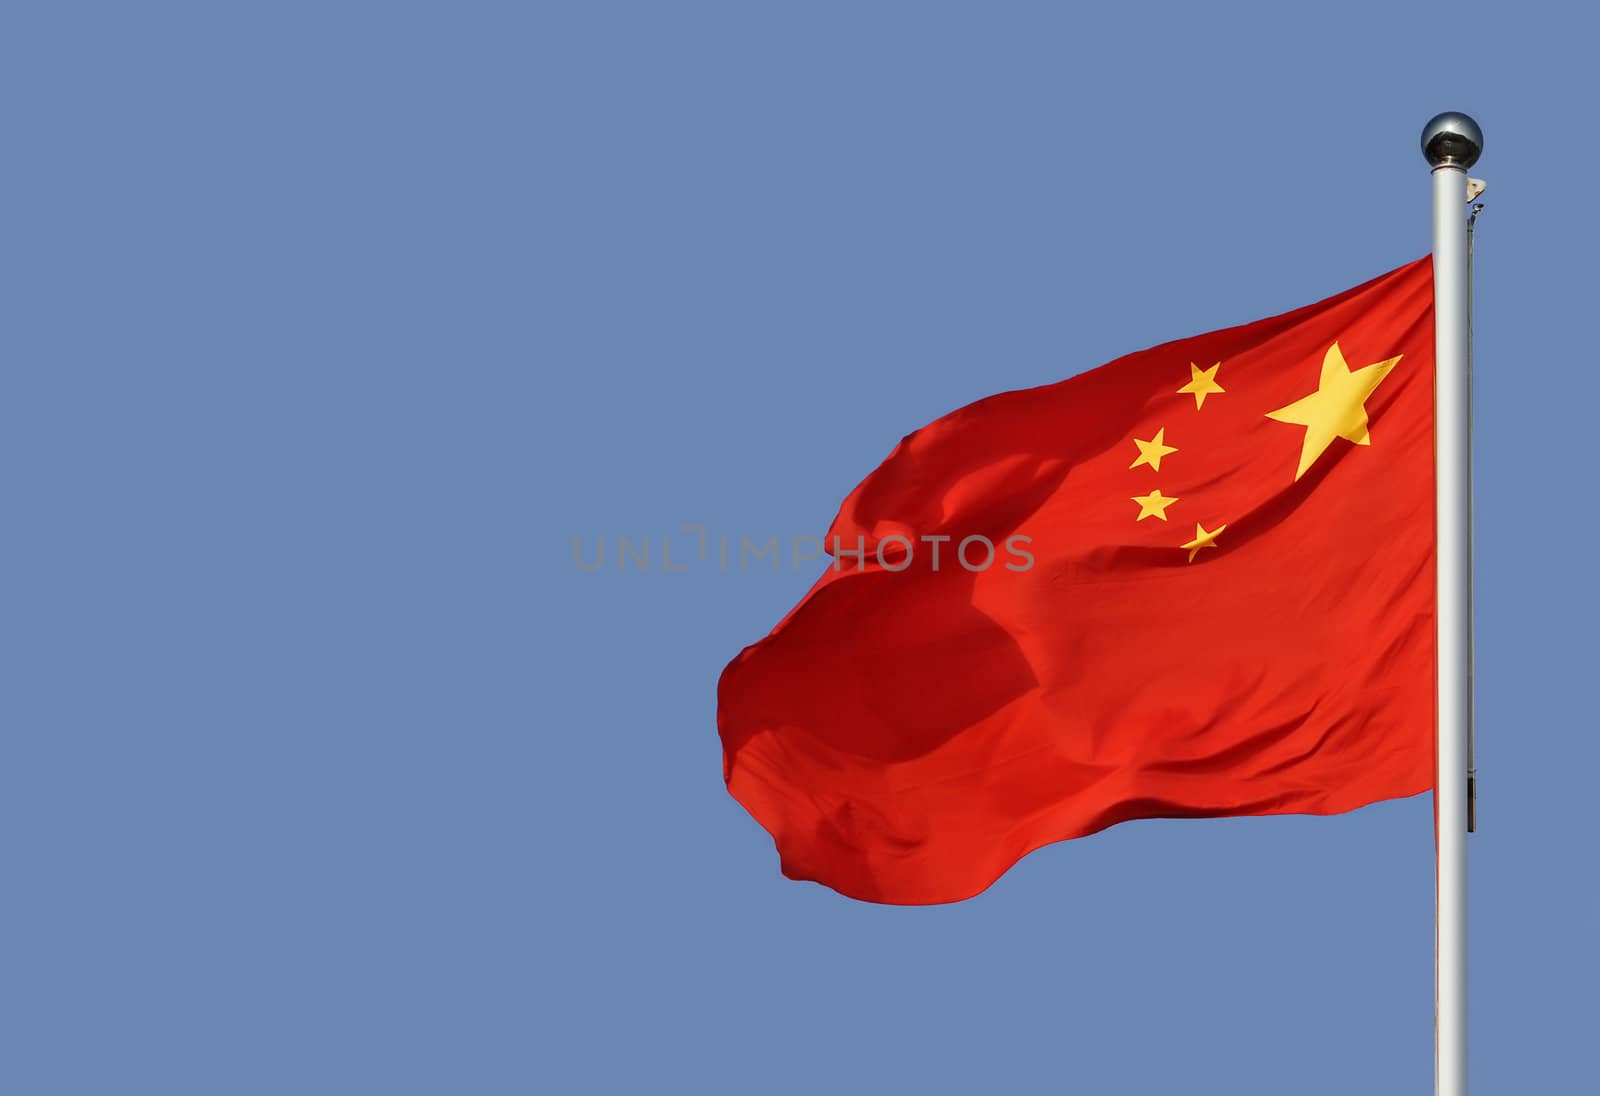 Chinese flag by Vectorex